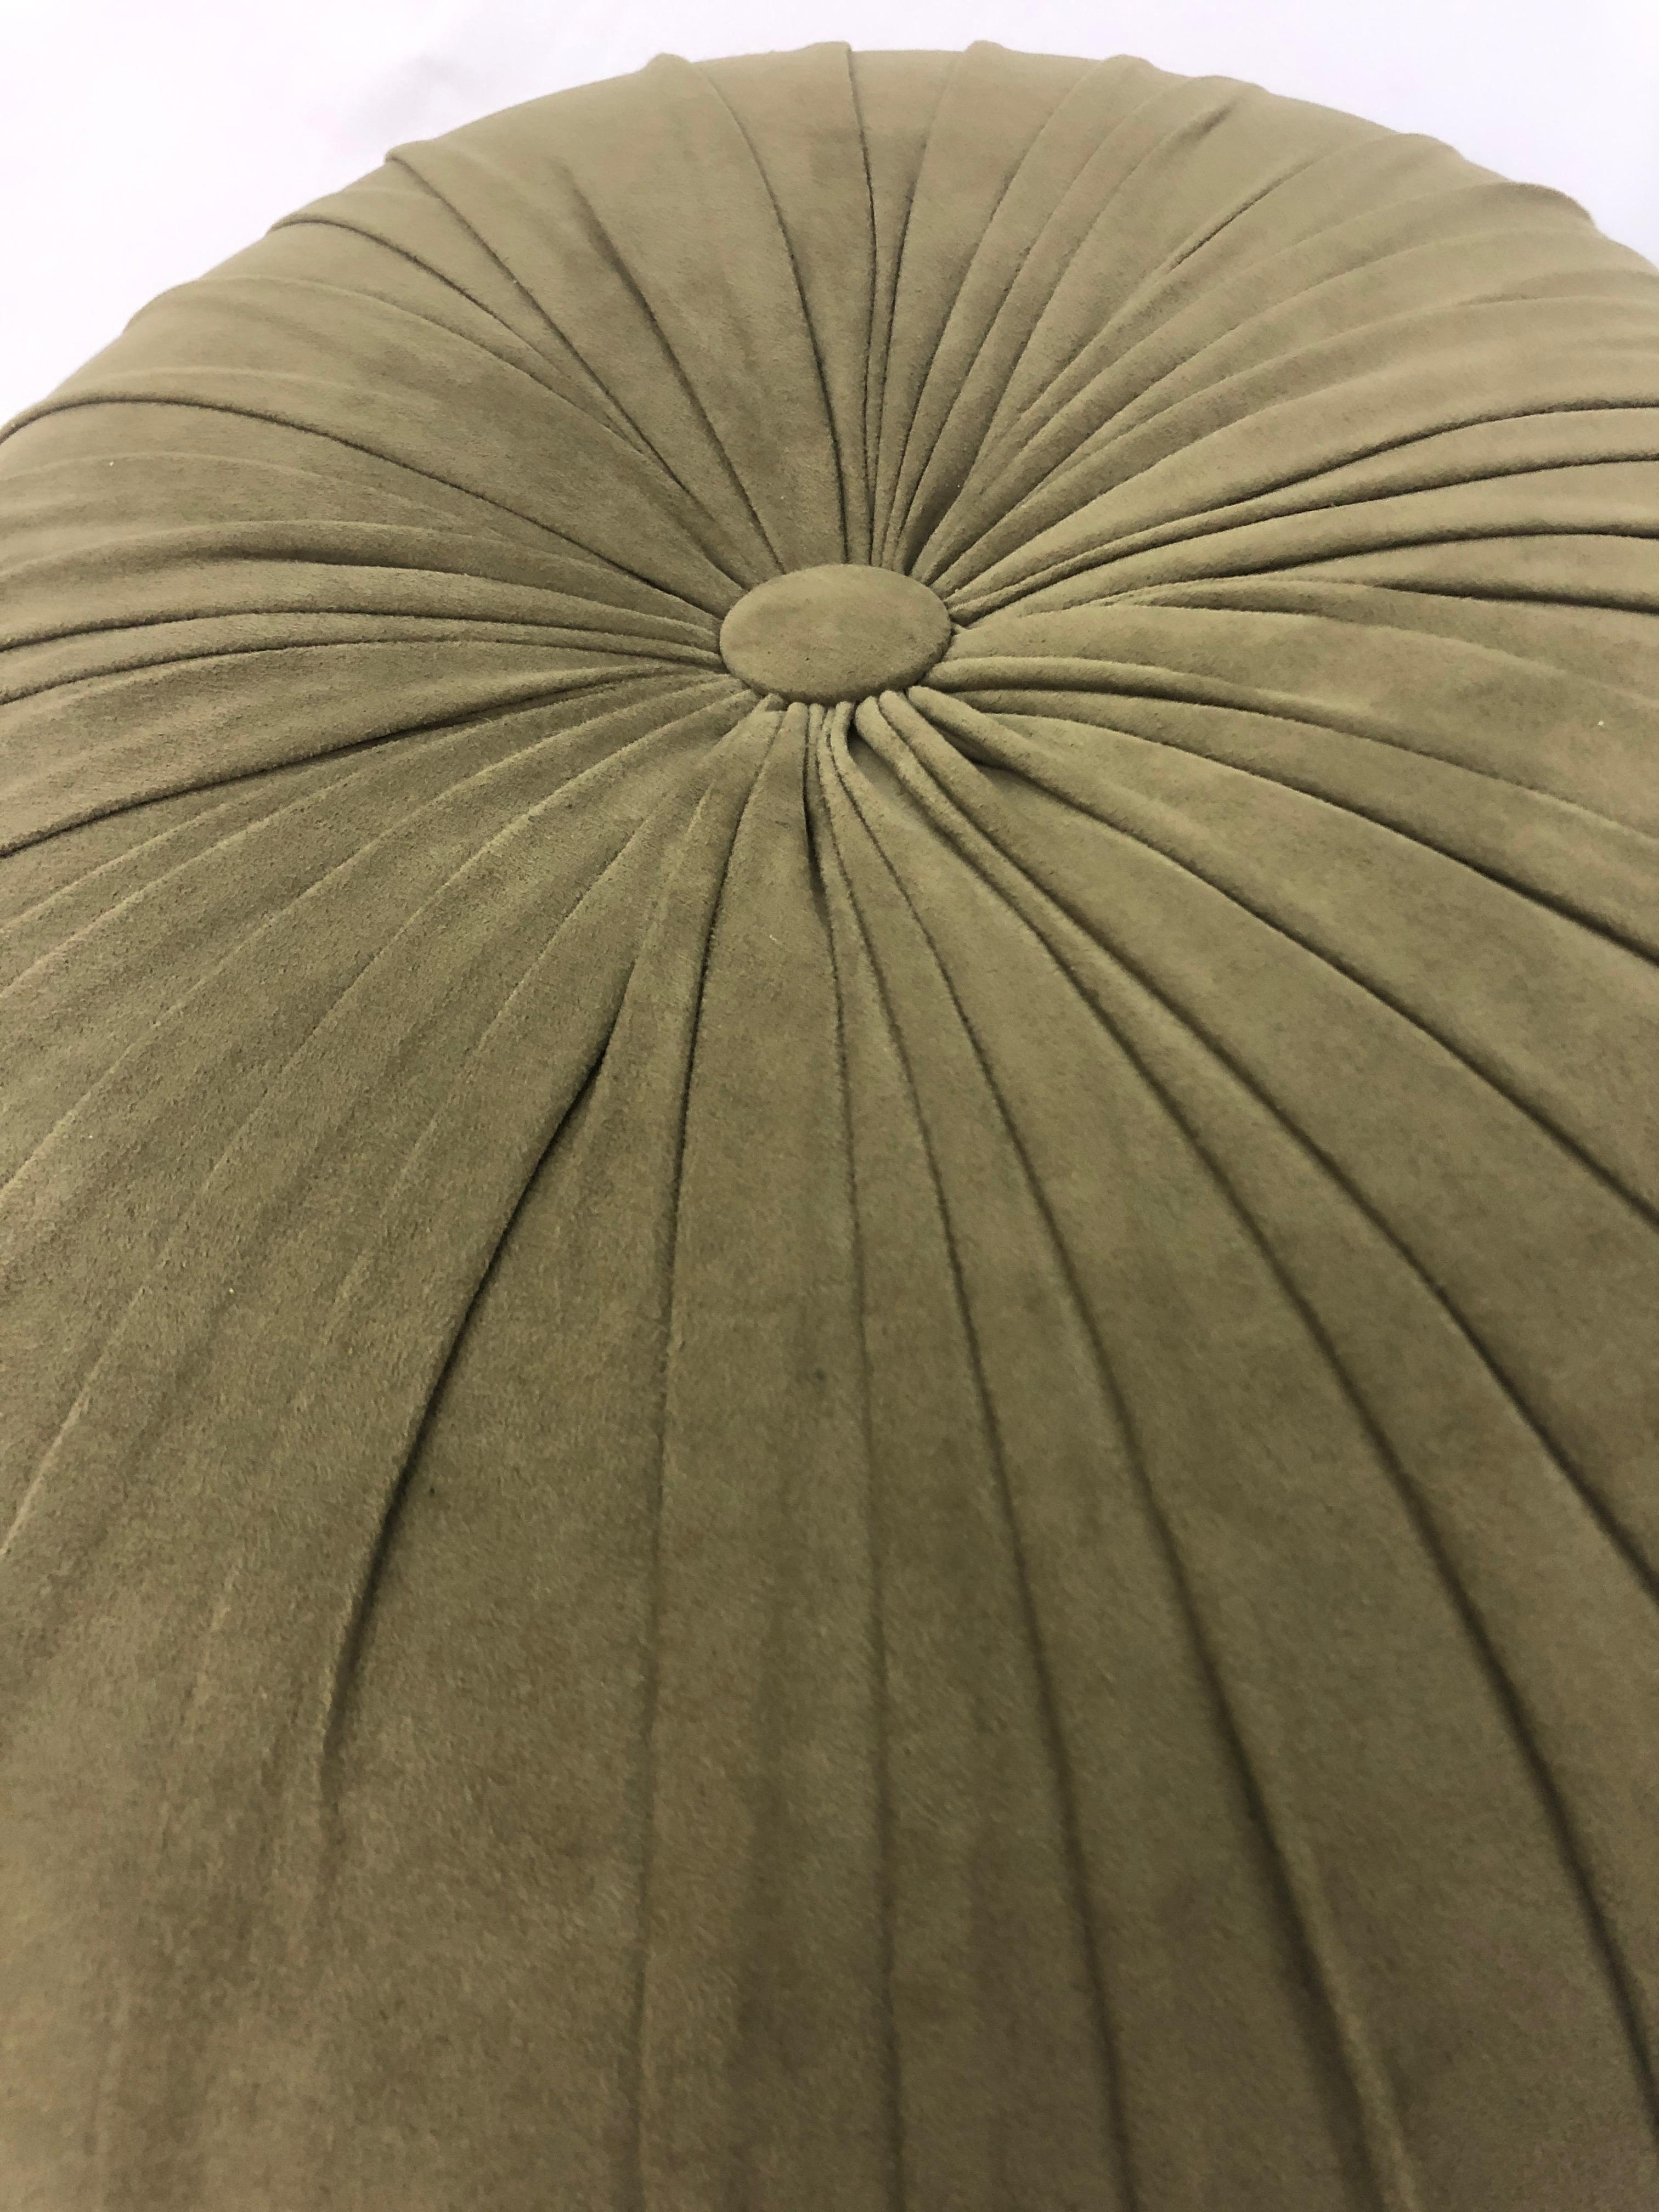 Schnazzy Oval Ultrasuede Ottoman Pouf 1